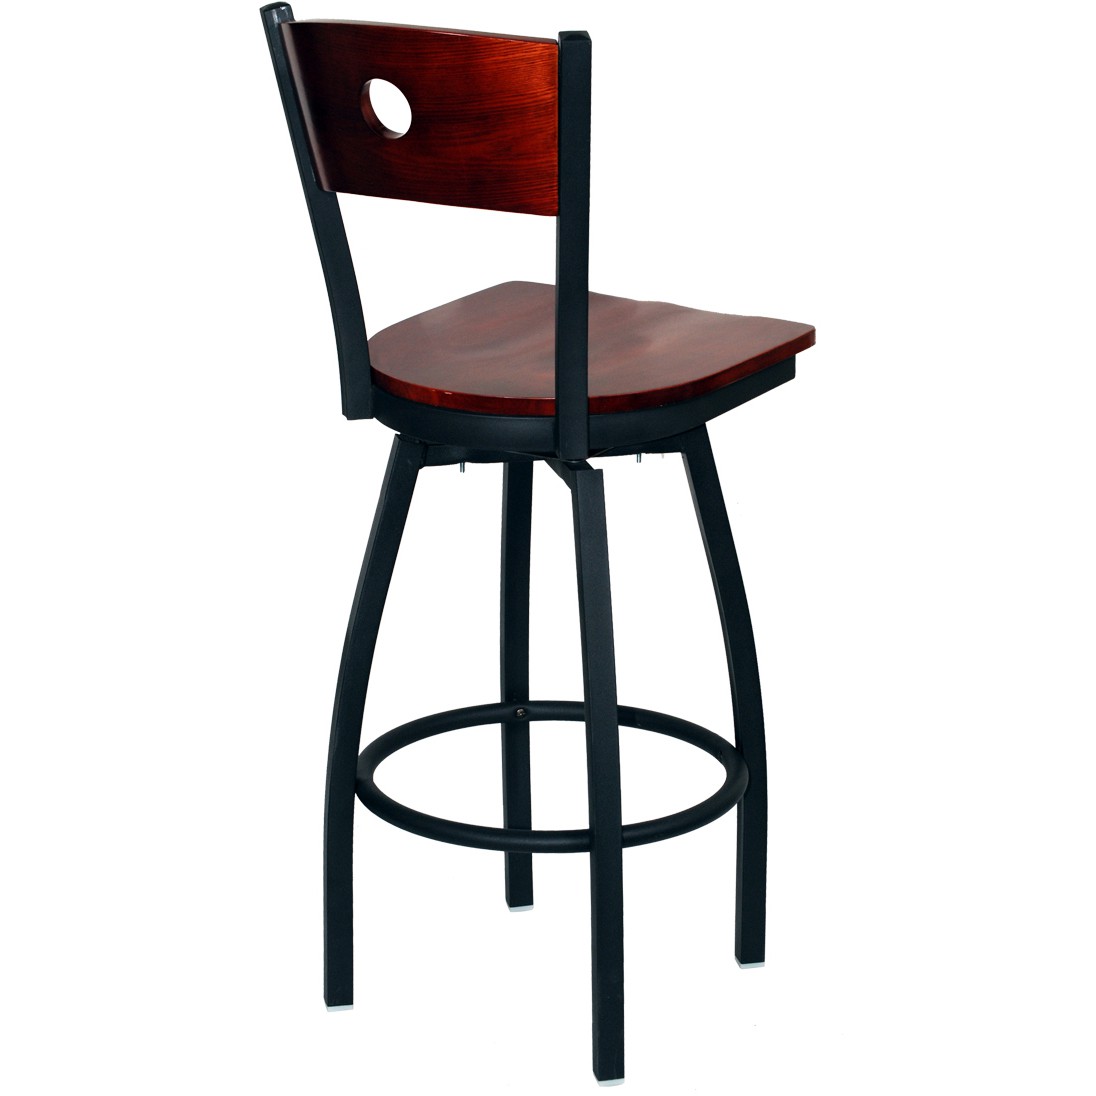 Interchangeable Back Metal Swivel Bar Stool With A Circled Back